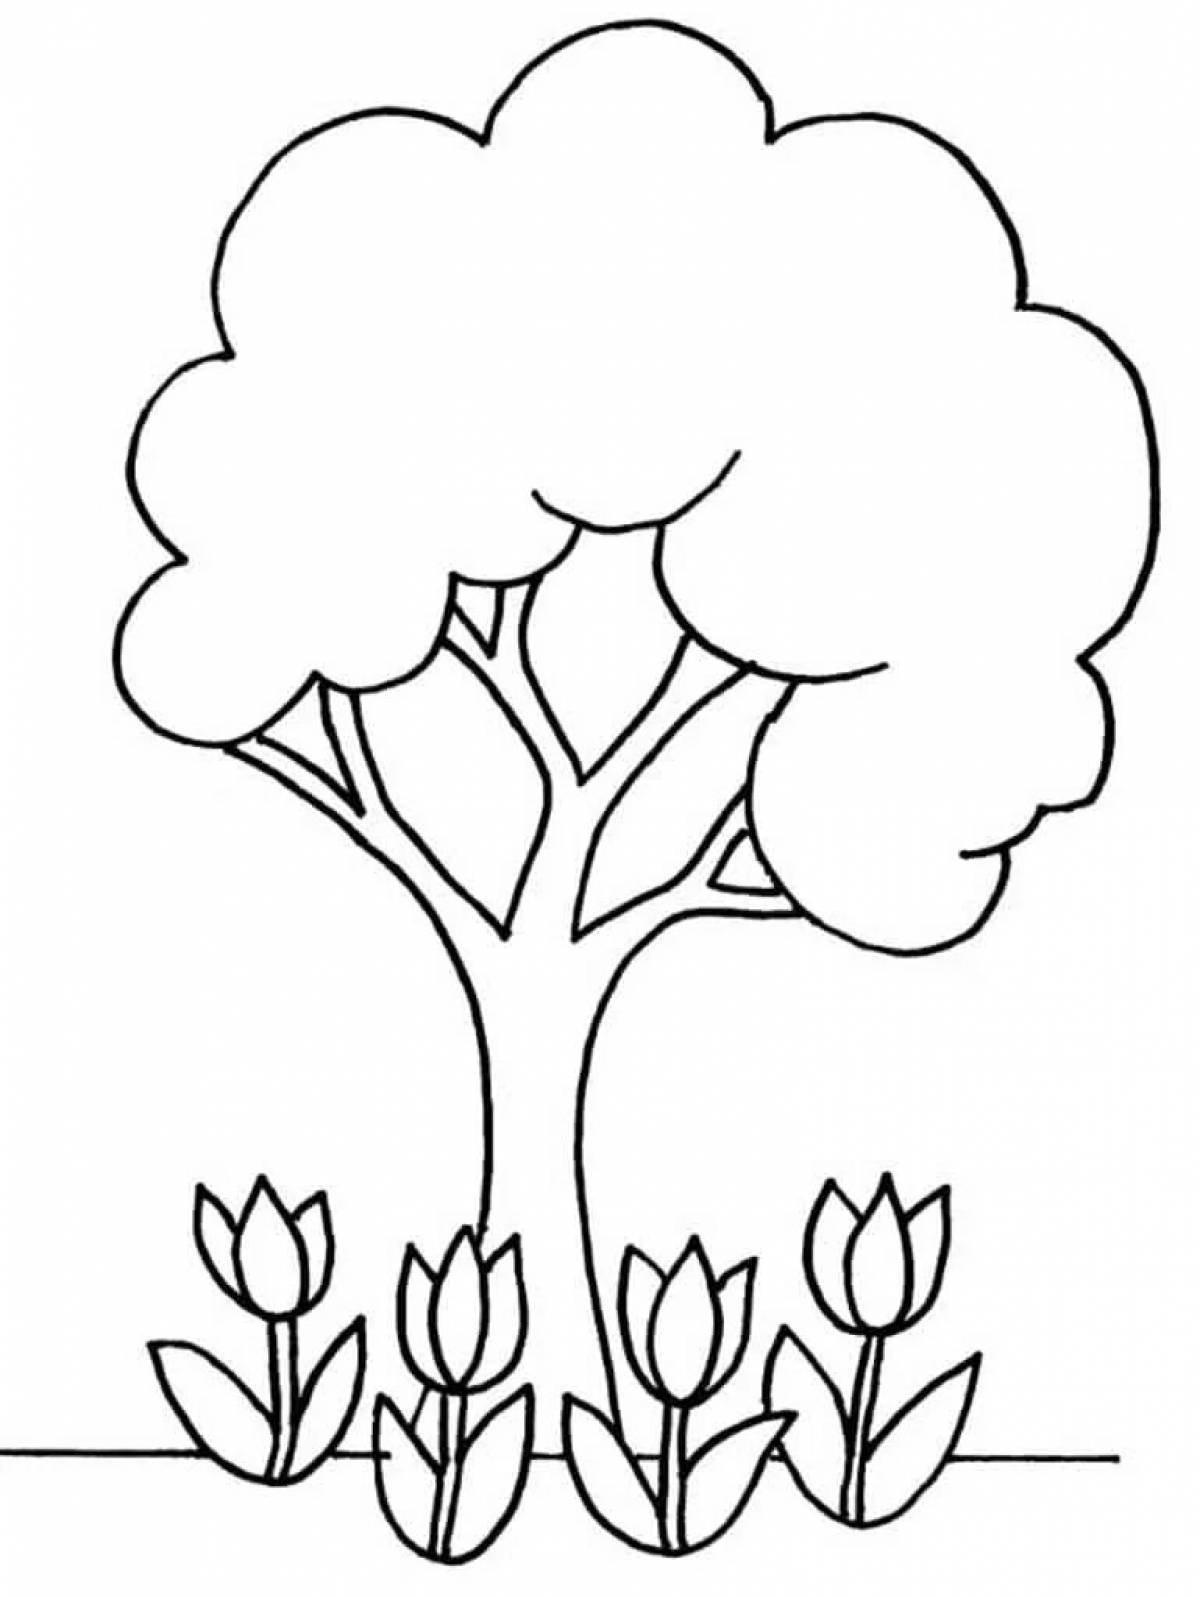 Tree coloring pages for 4-5 year olds